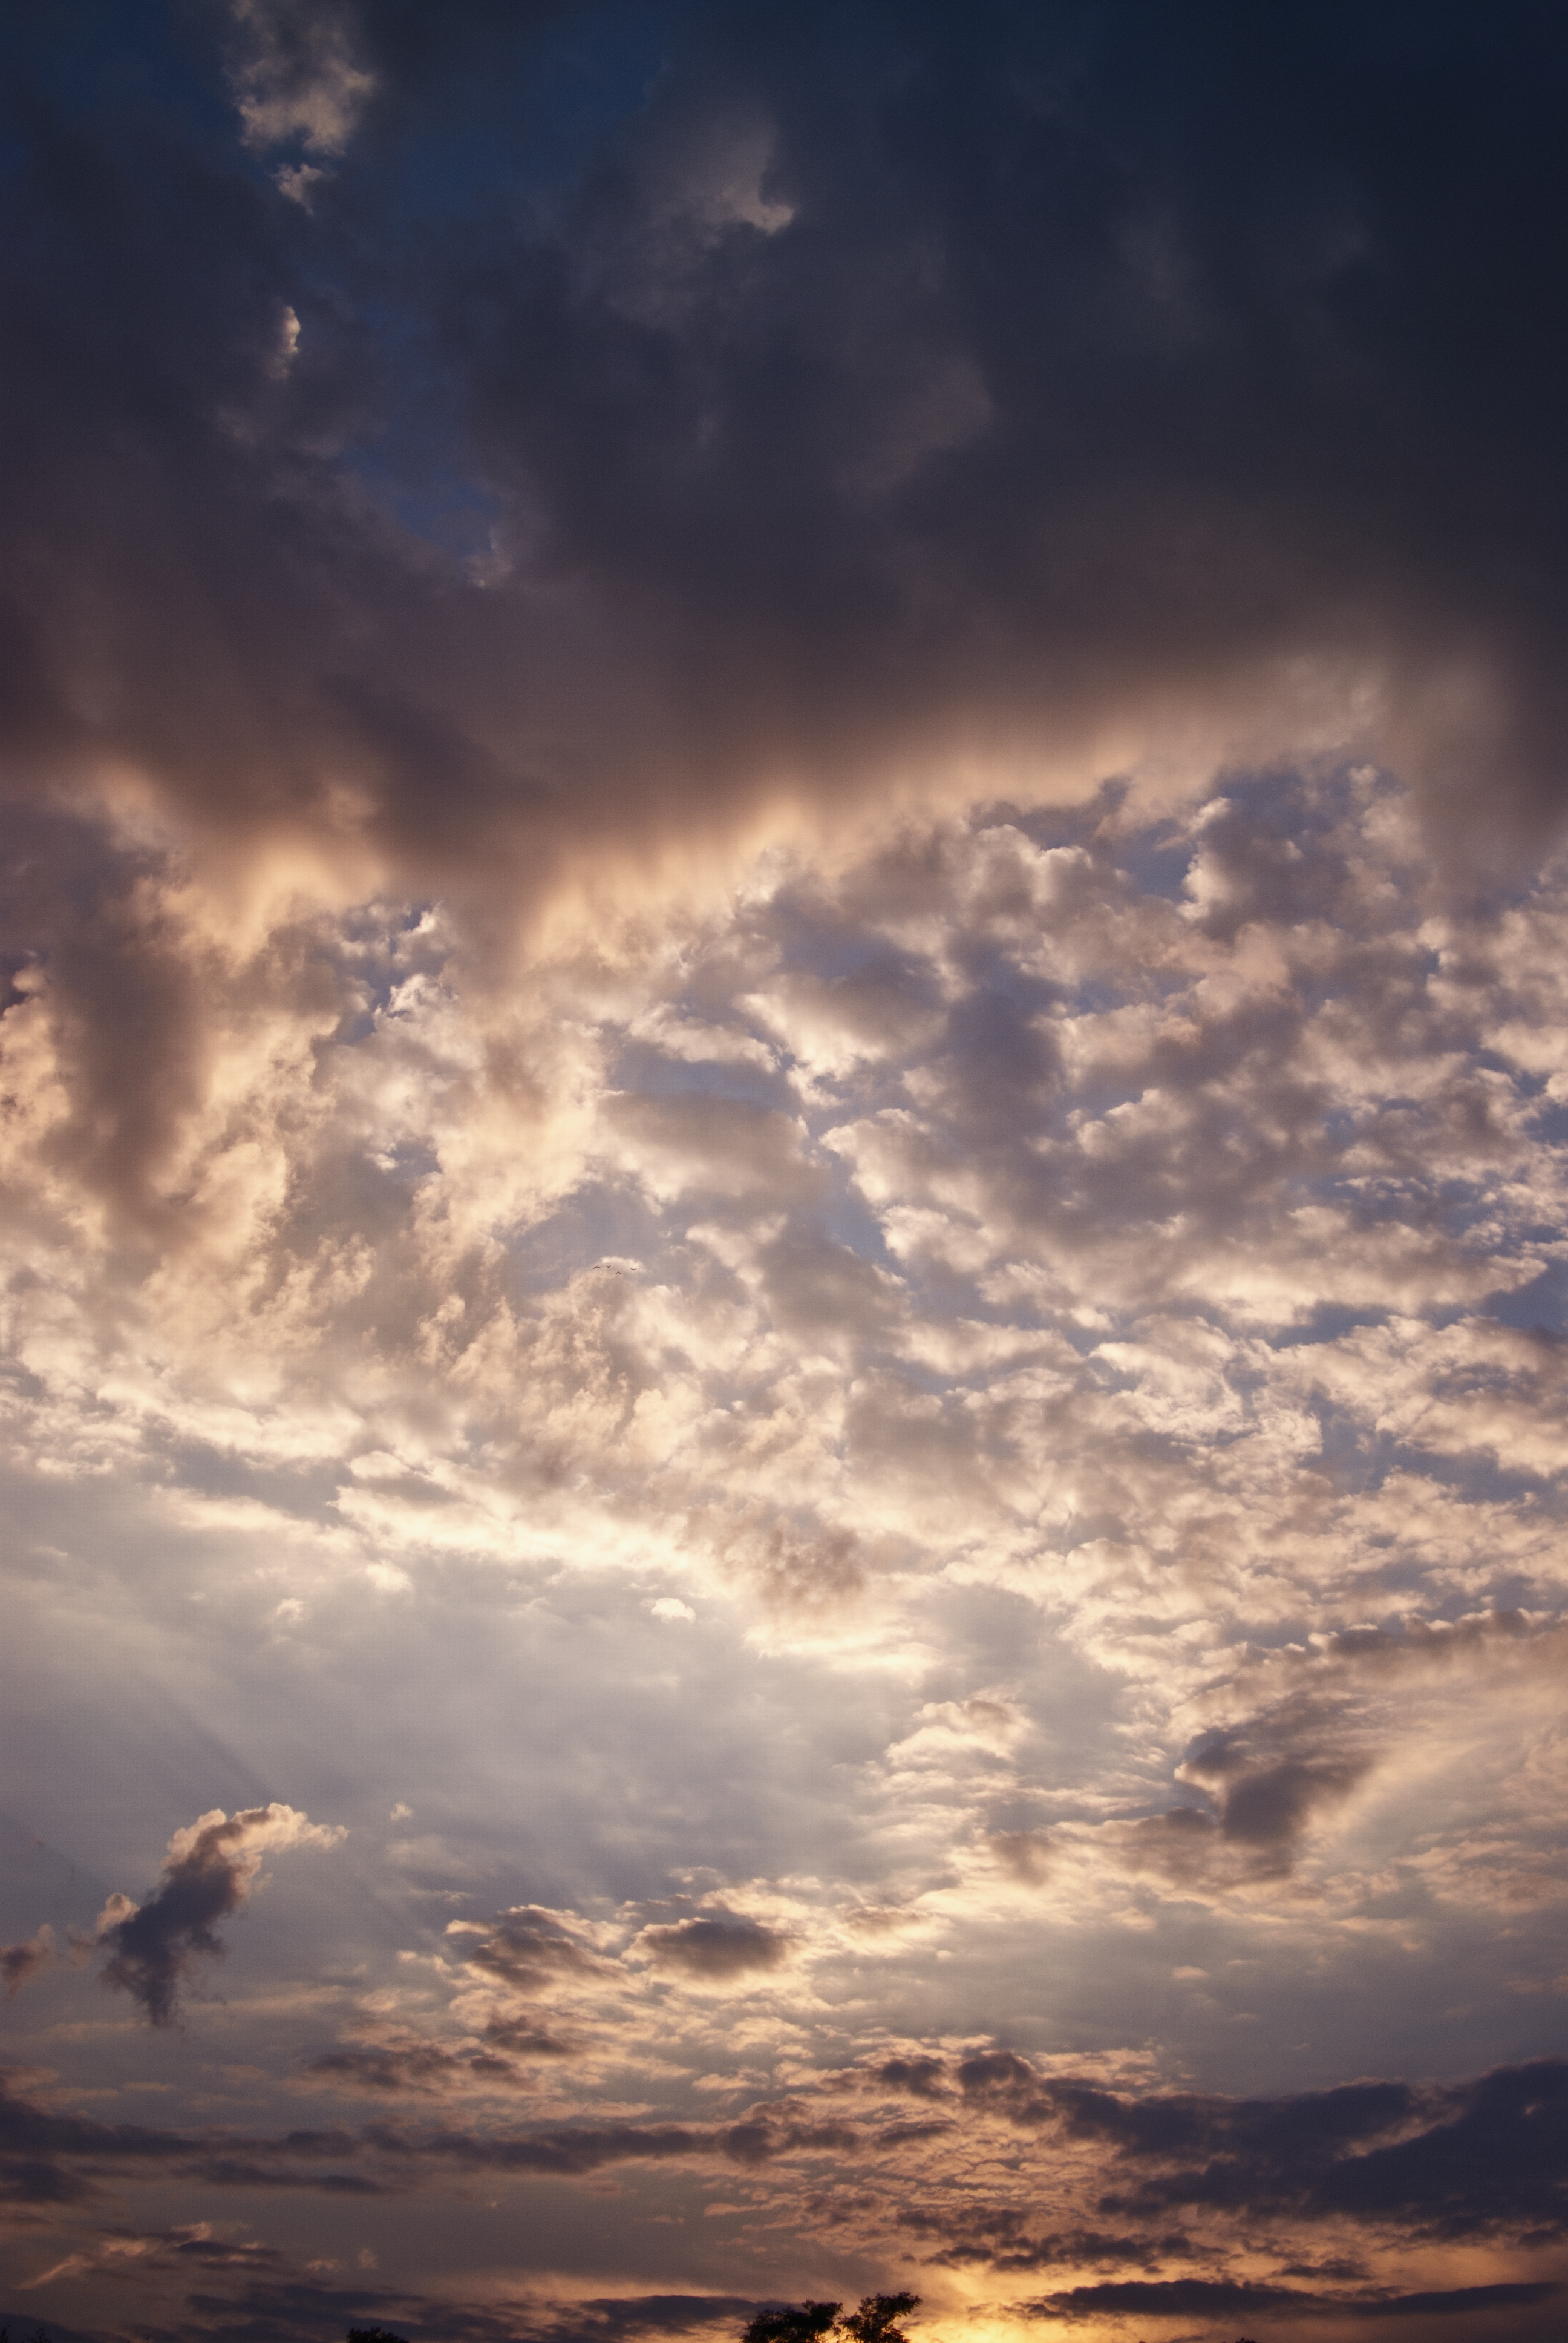 Free HD clouds, nature, sunset, sky, evening, cloudy